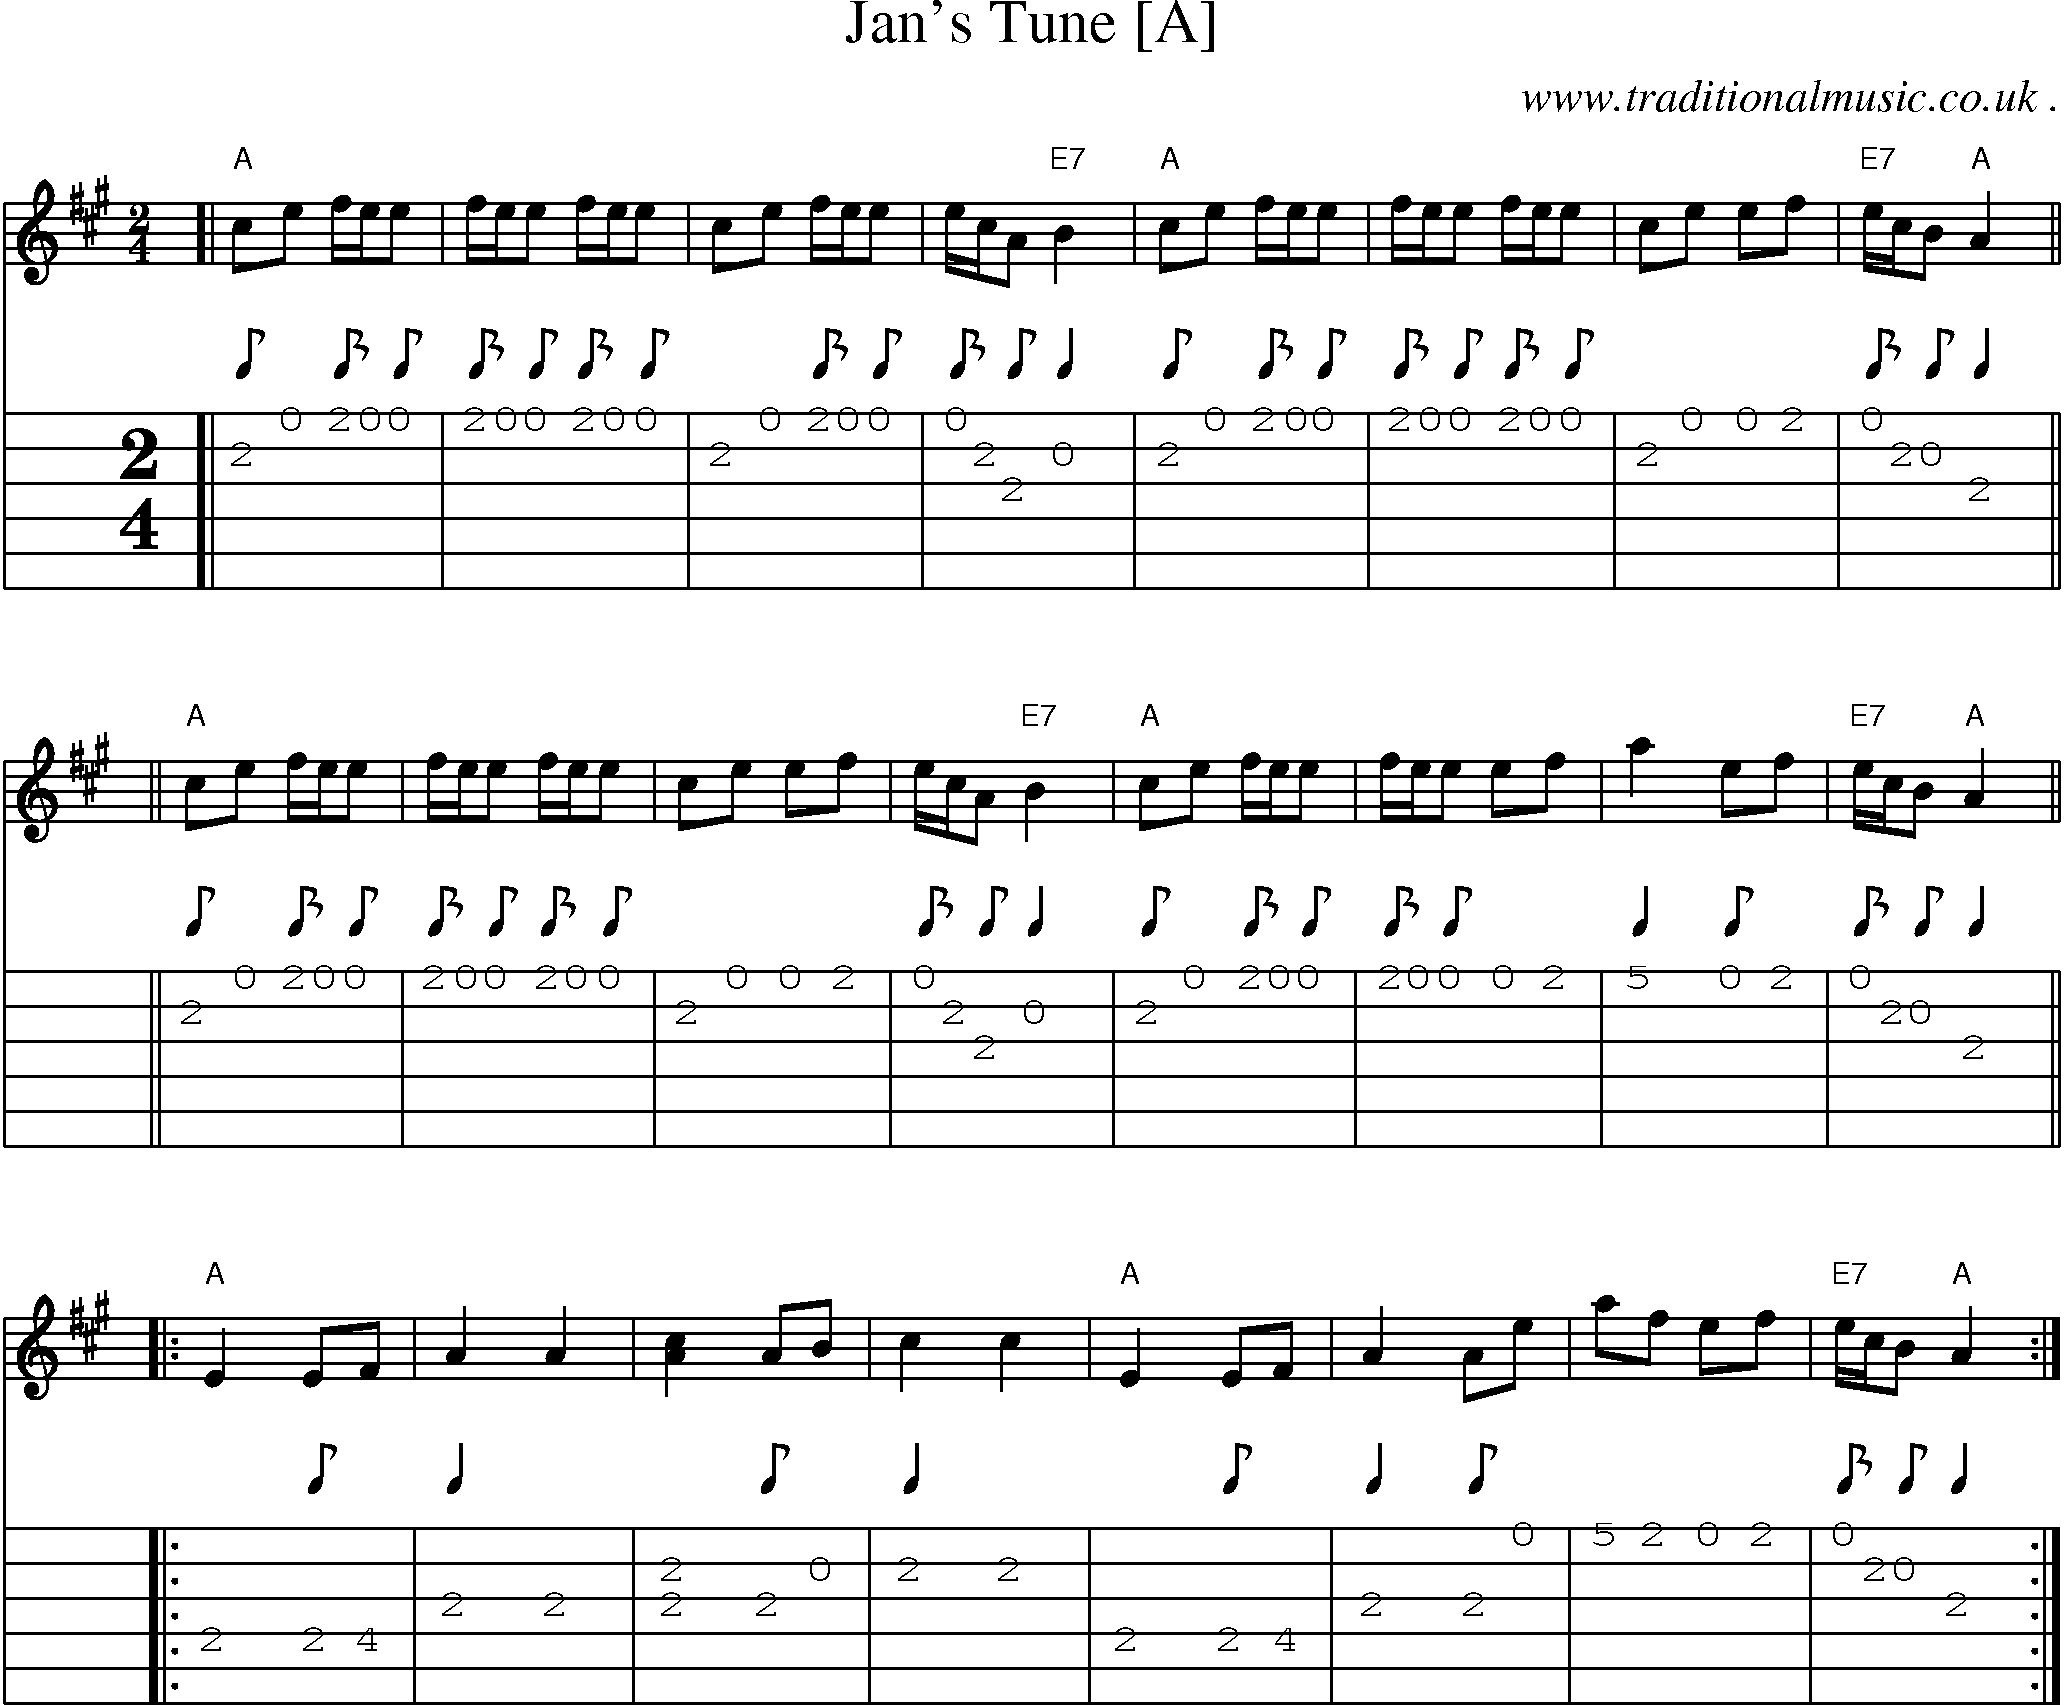 Music Score and Guitar Tabs for Jans Tune [a]